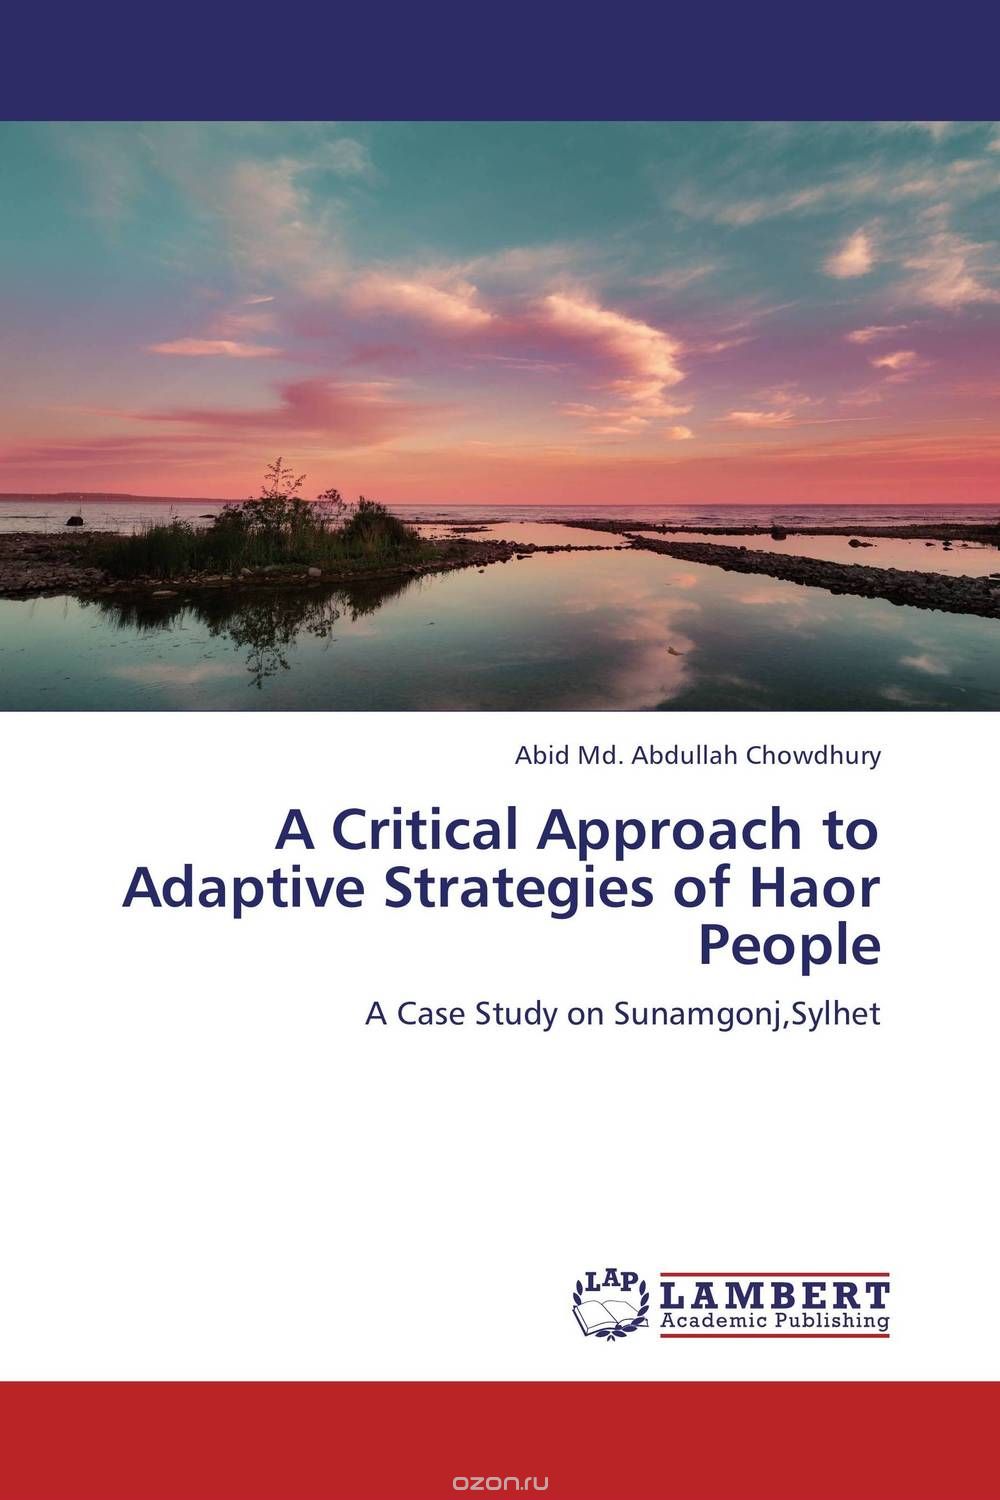 A Critical Approach to Adaptive Strategies of Haor People